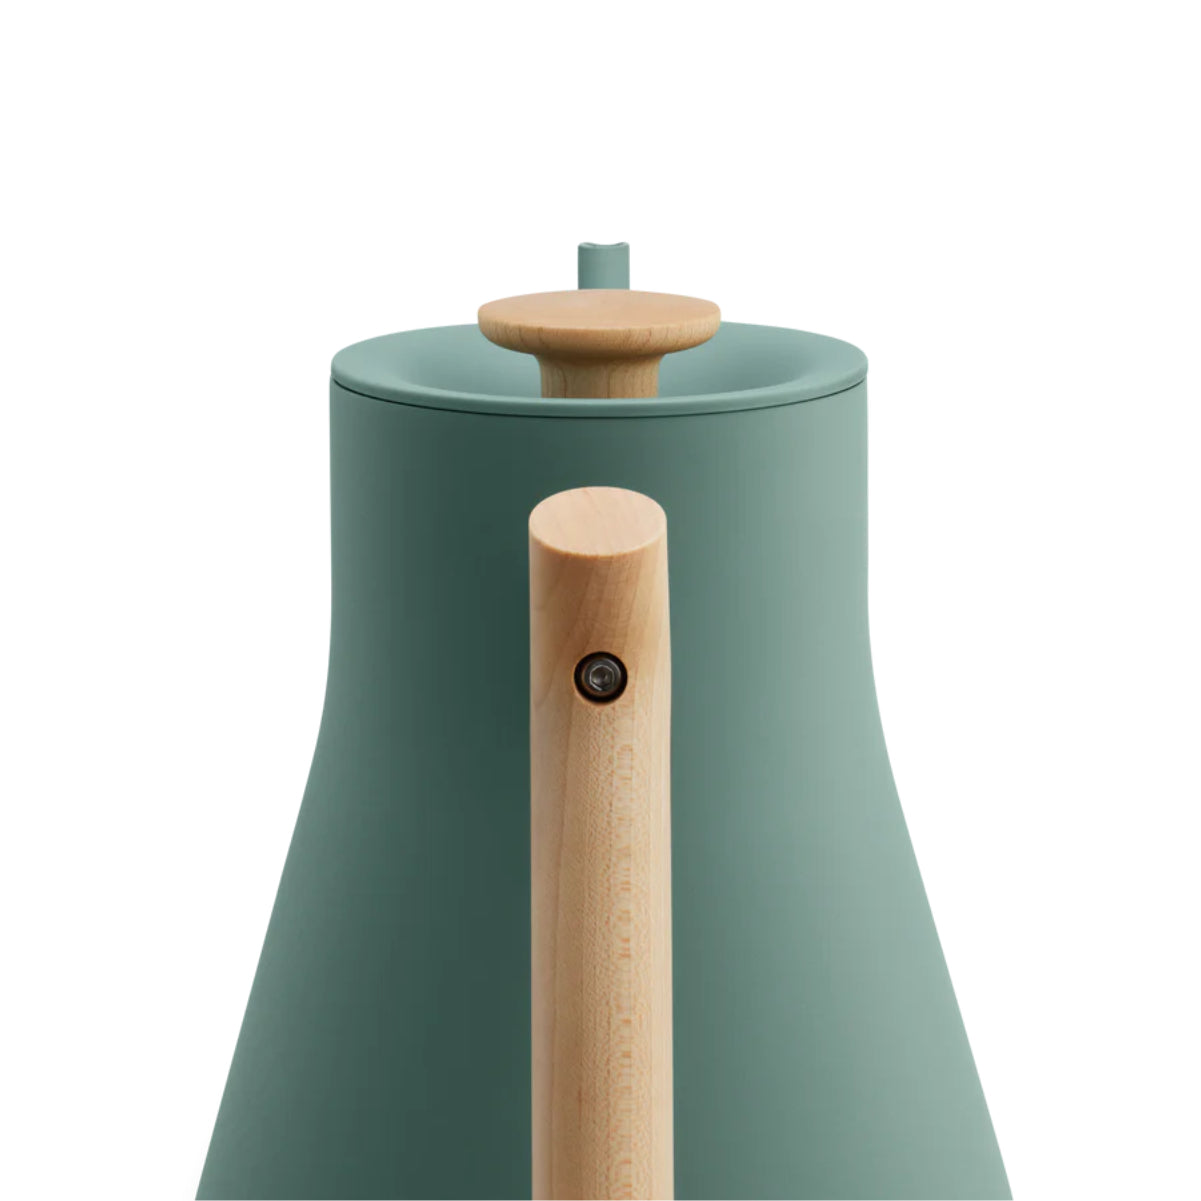 Fellow Stagg EKG Pro Electric Pour Over Kettle (Smoke Green + Maple)